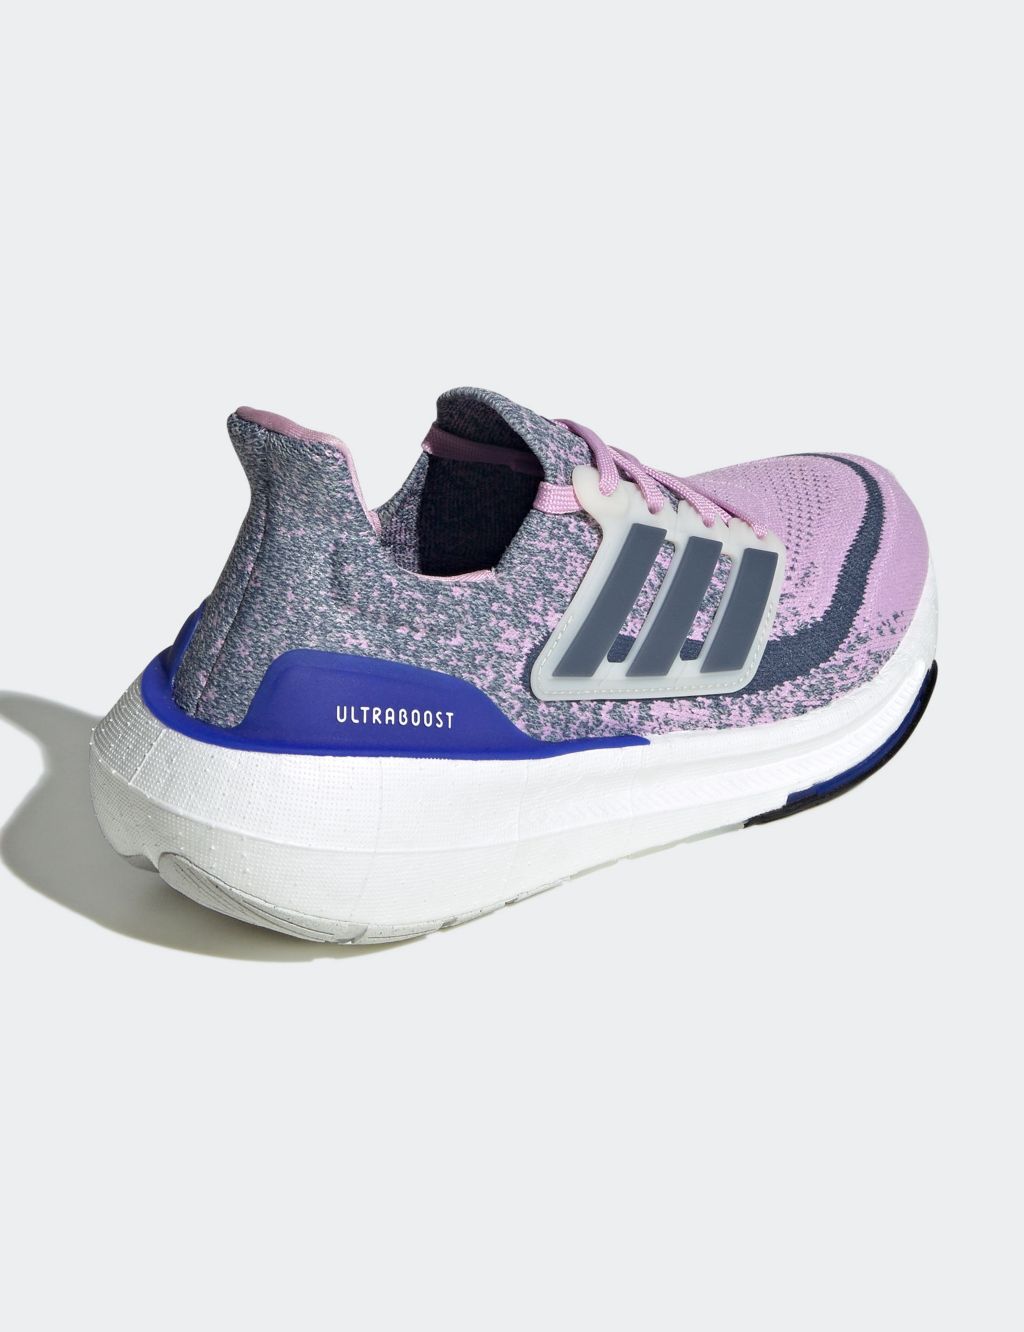 Ultraboost 23 Trainers image 6